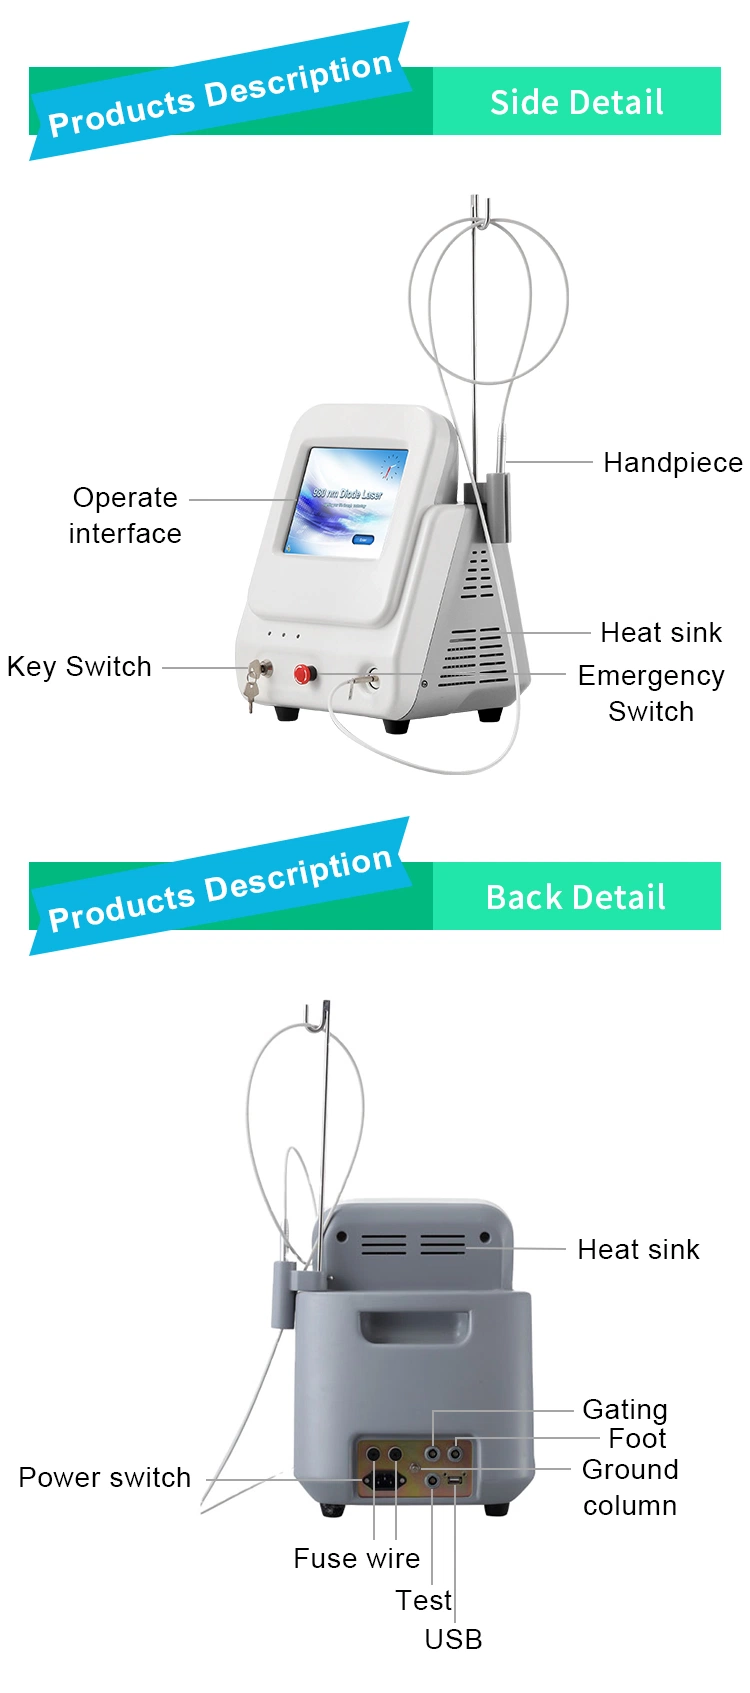 Apply Android Operation System 30-45 Minutes Treatment Procedure 980nm Diode Laser Physiotherapy Equipment